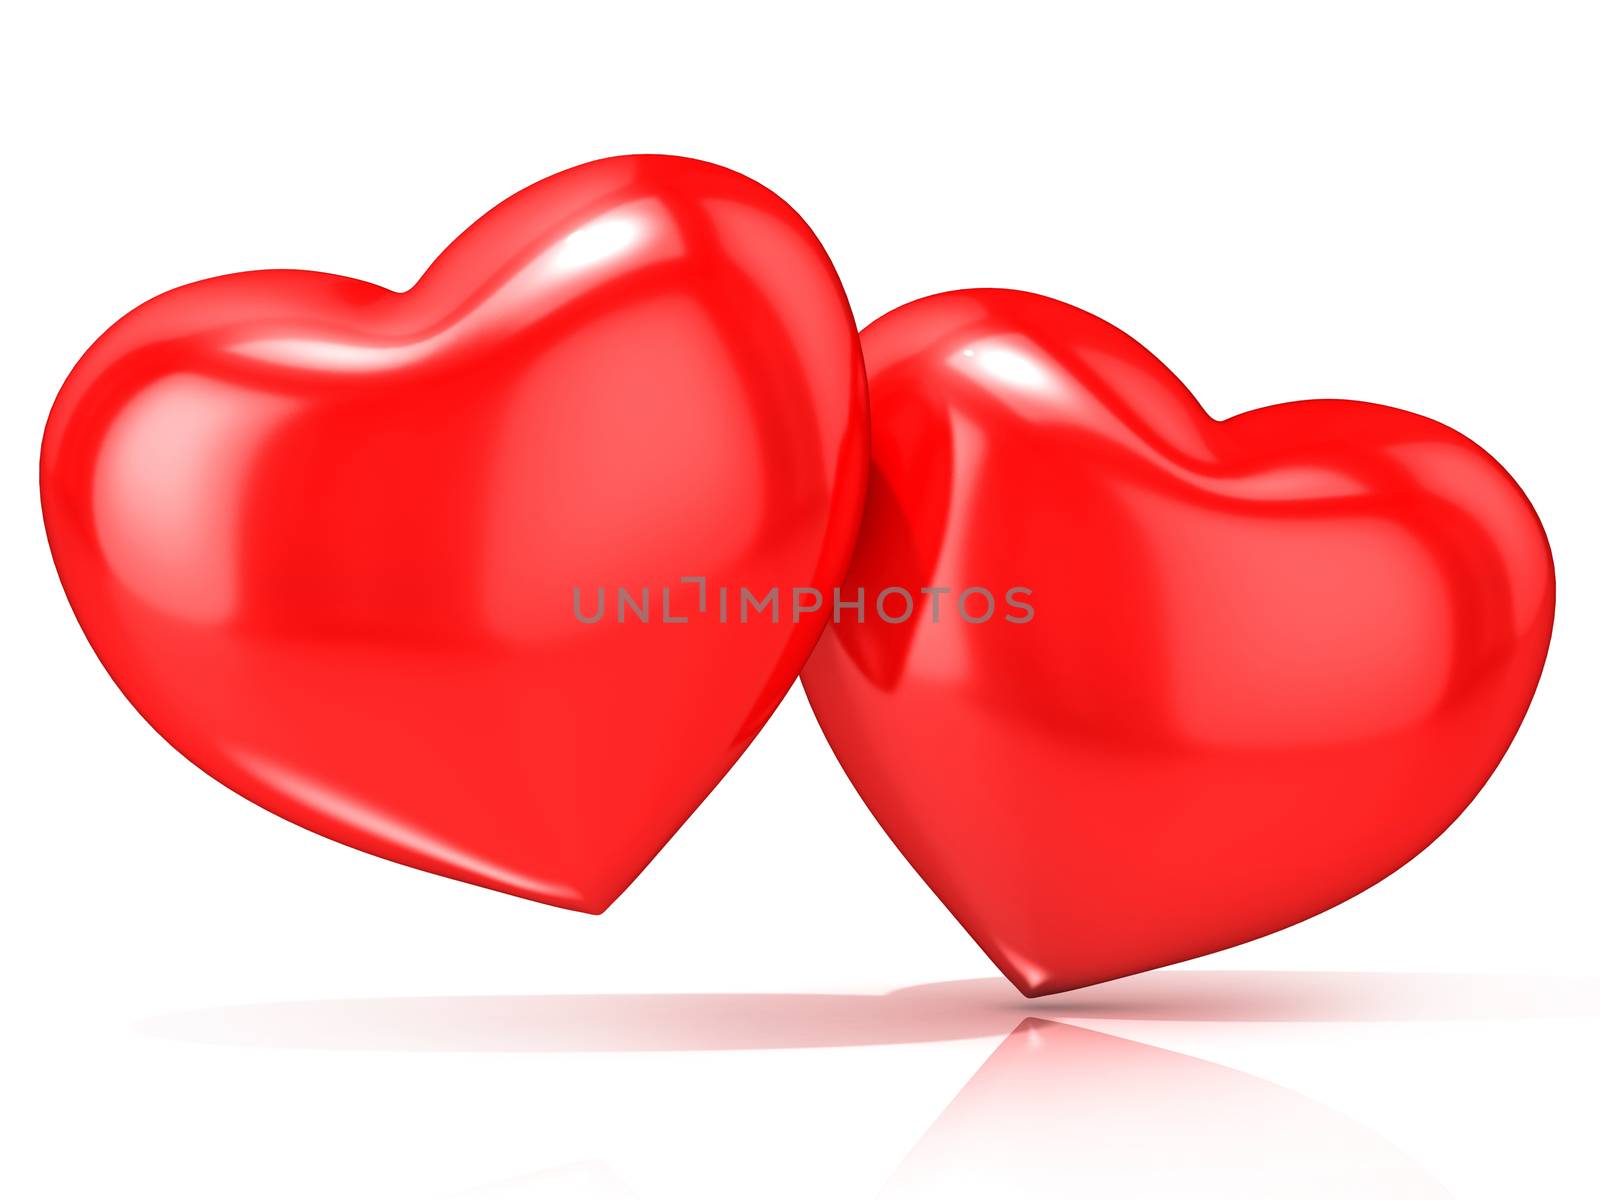 Two red hearts. 3D render illustration isolated on white background